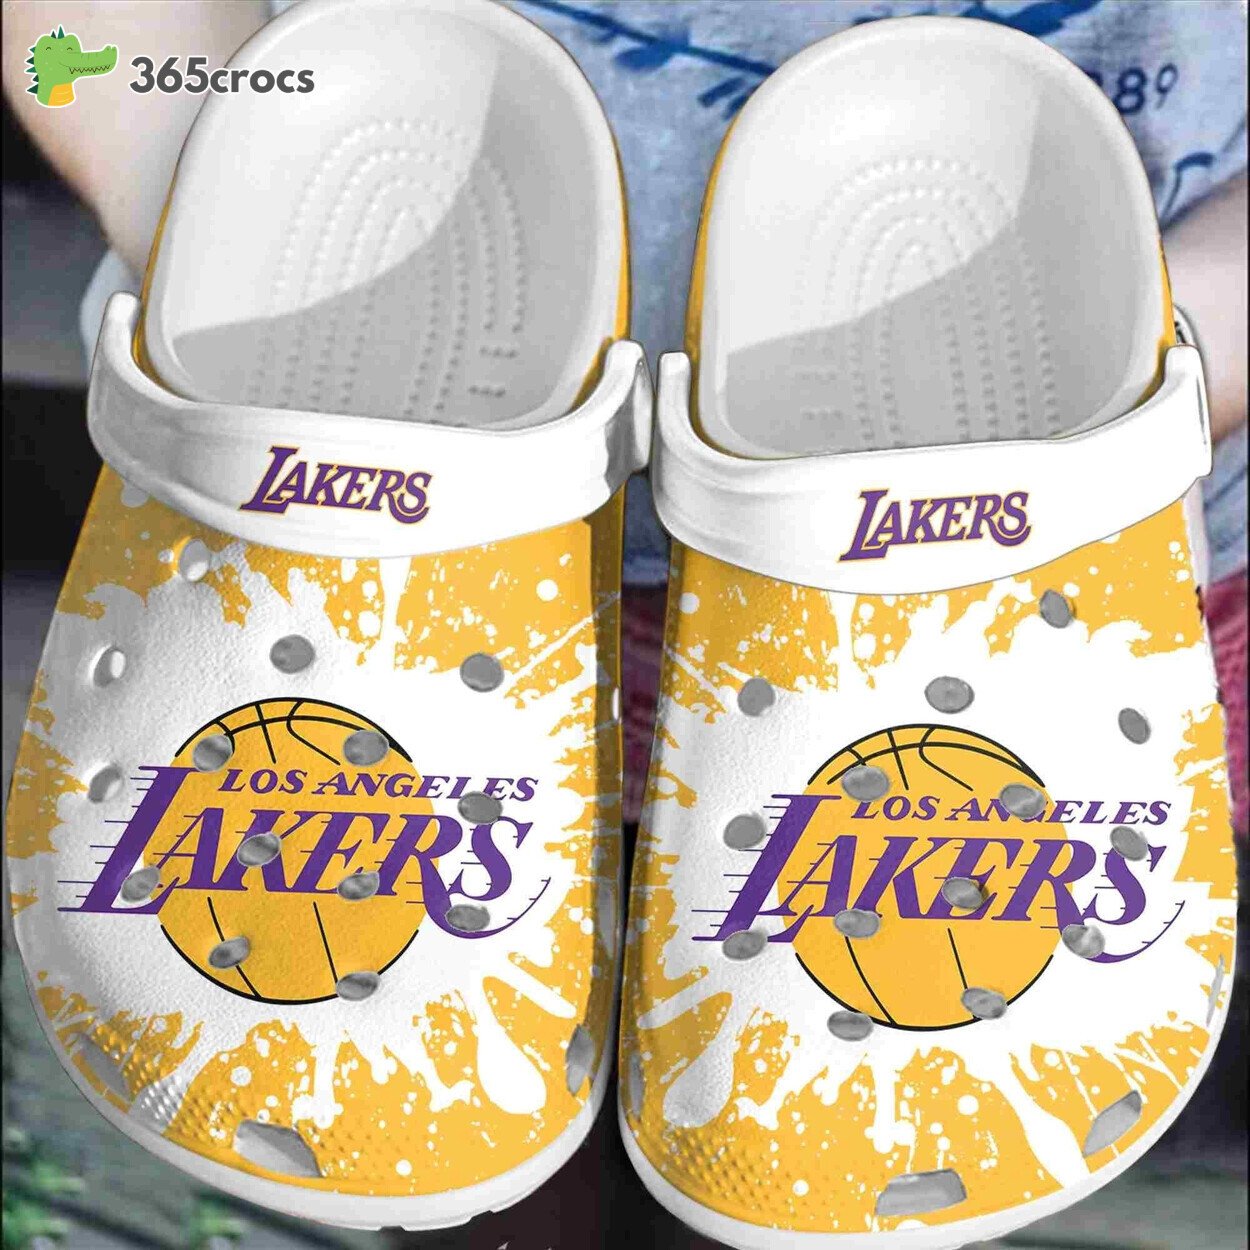 Los Angeles Lakers Basketball Club Clogs Comfortable Crocss Shoes